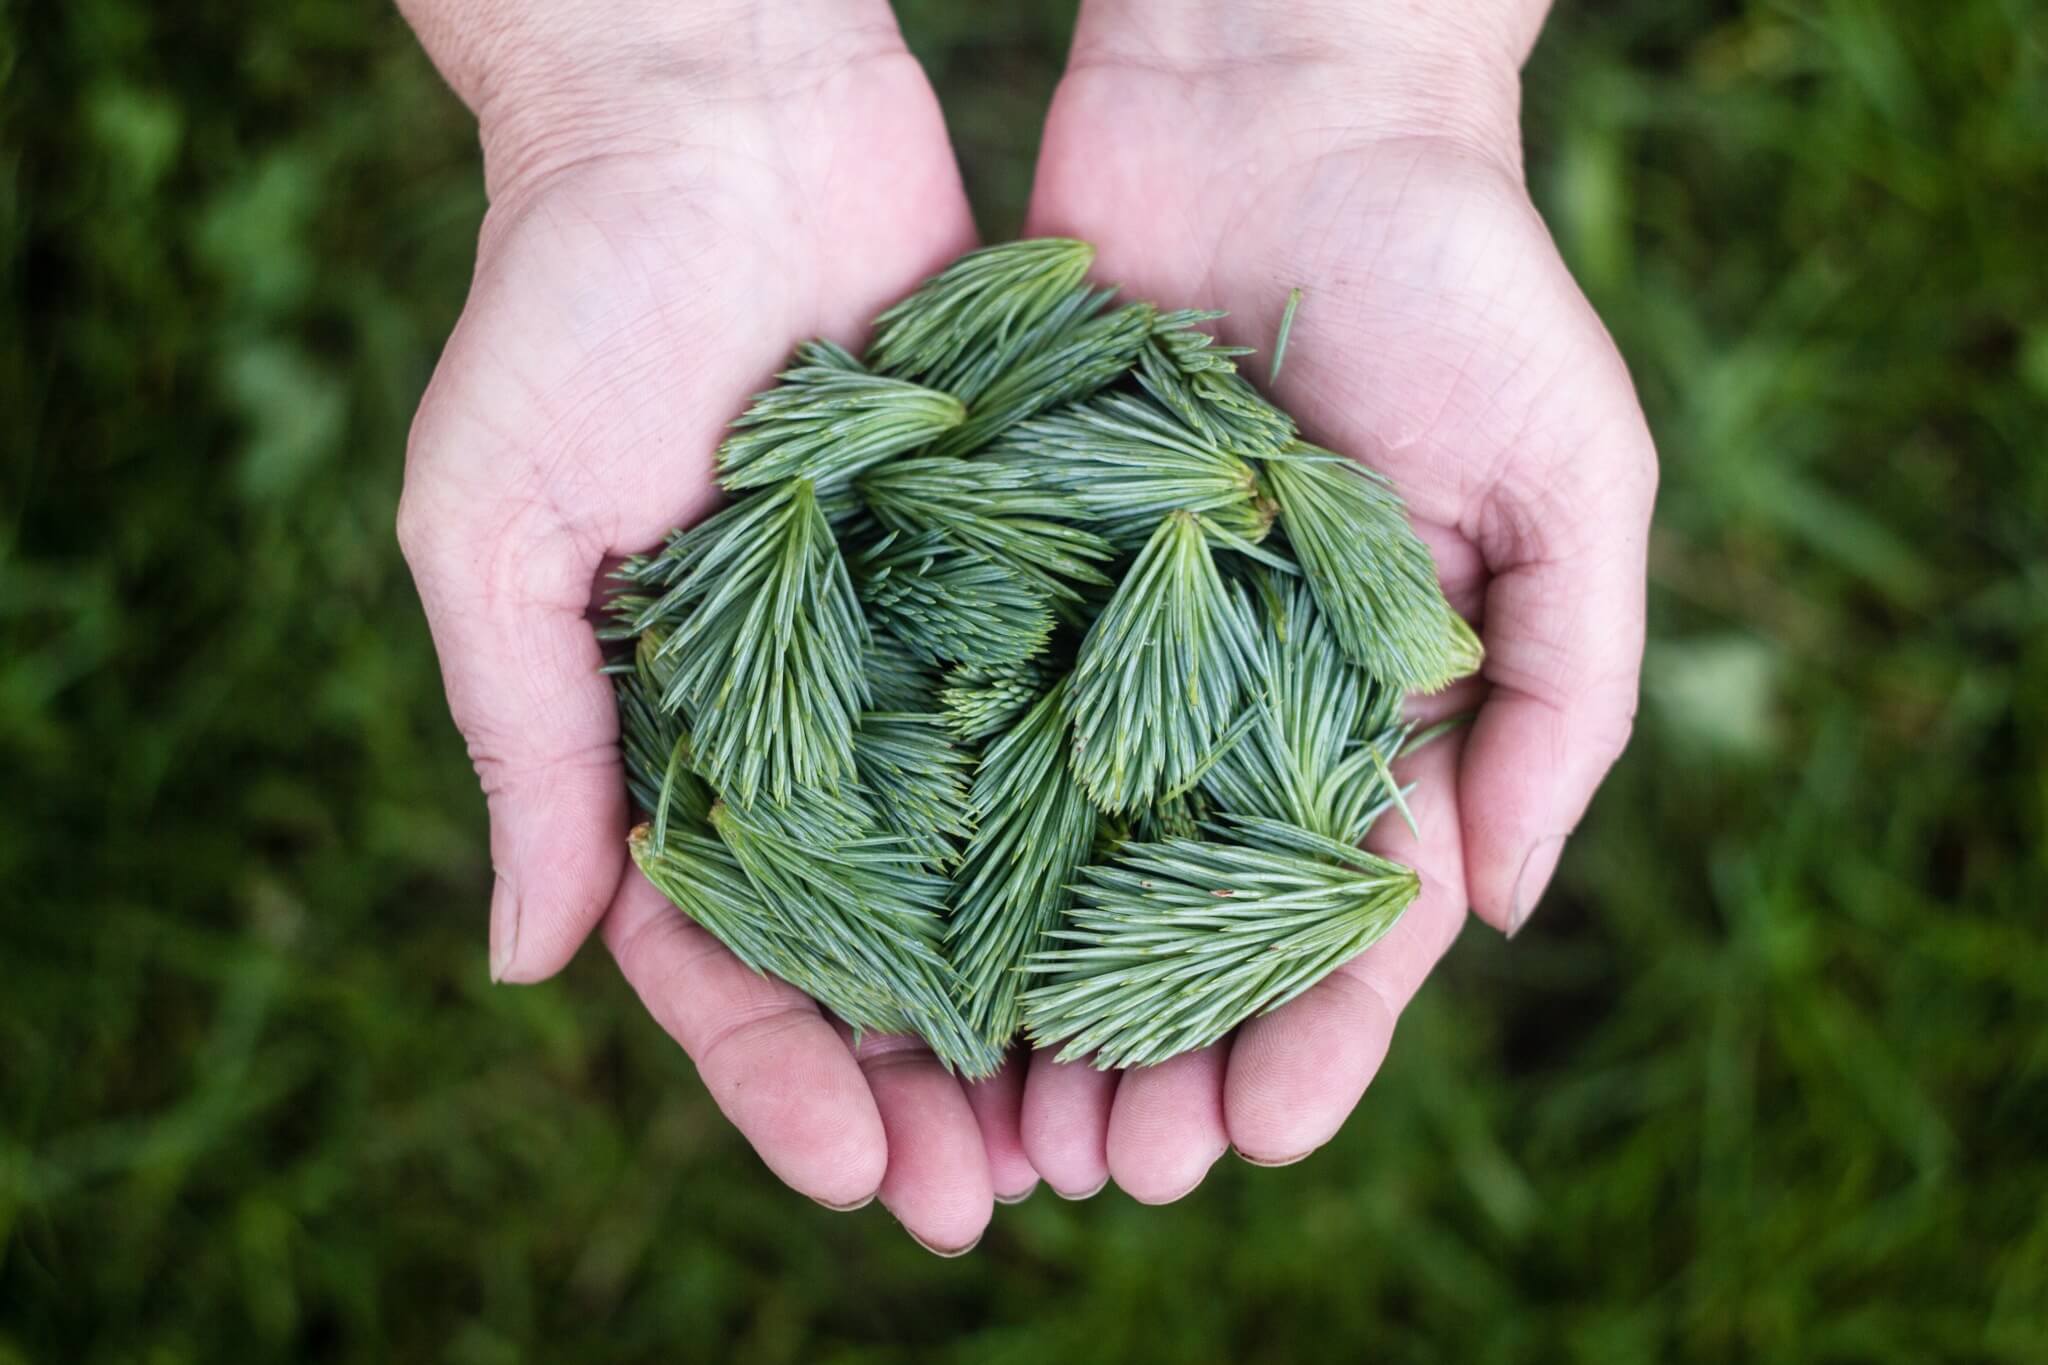 A person’s cupped hands holding long shoots from an evergreen tree